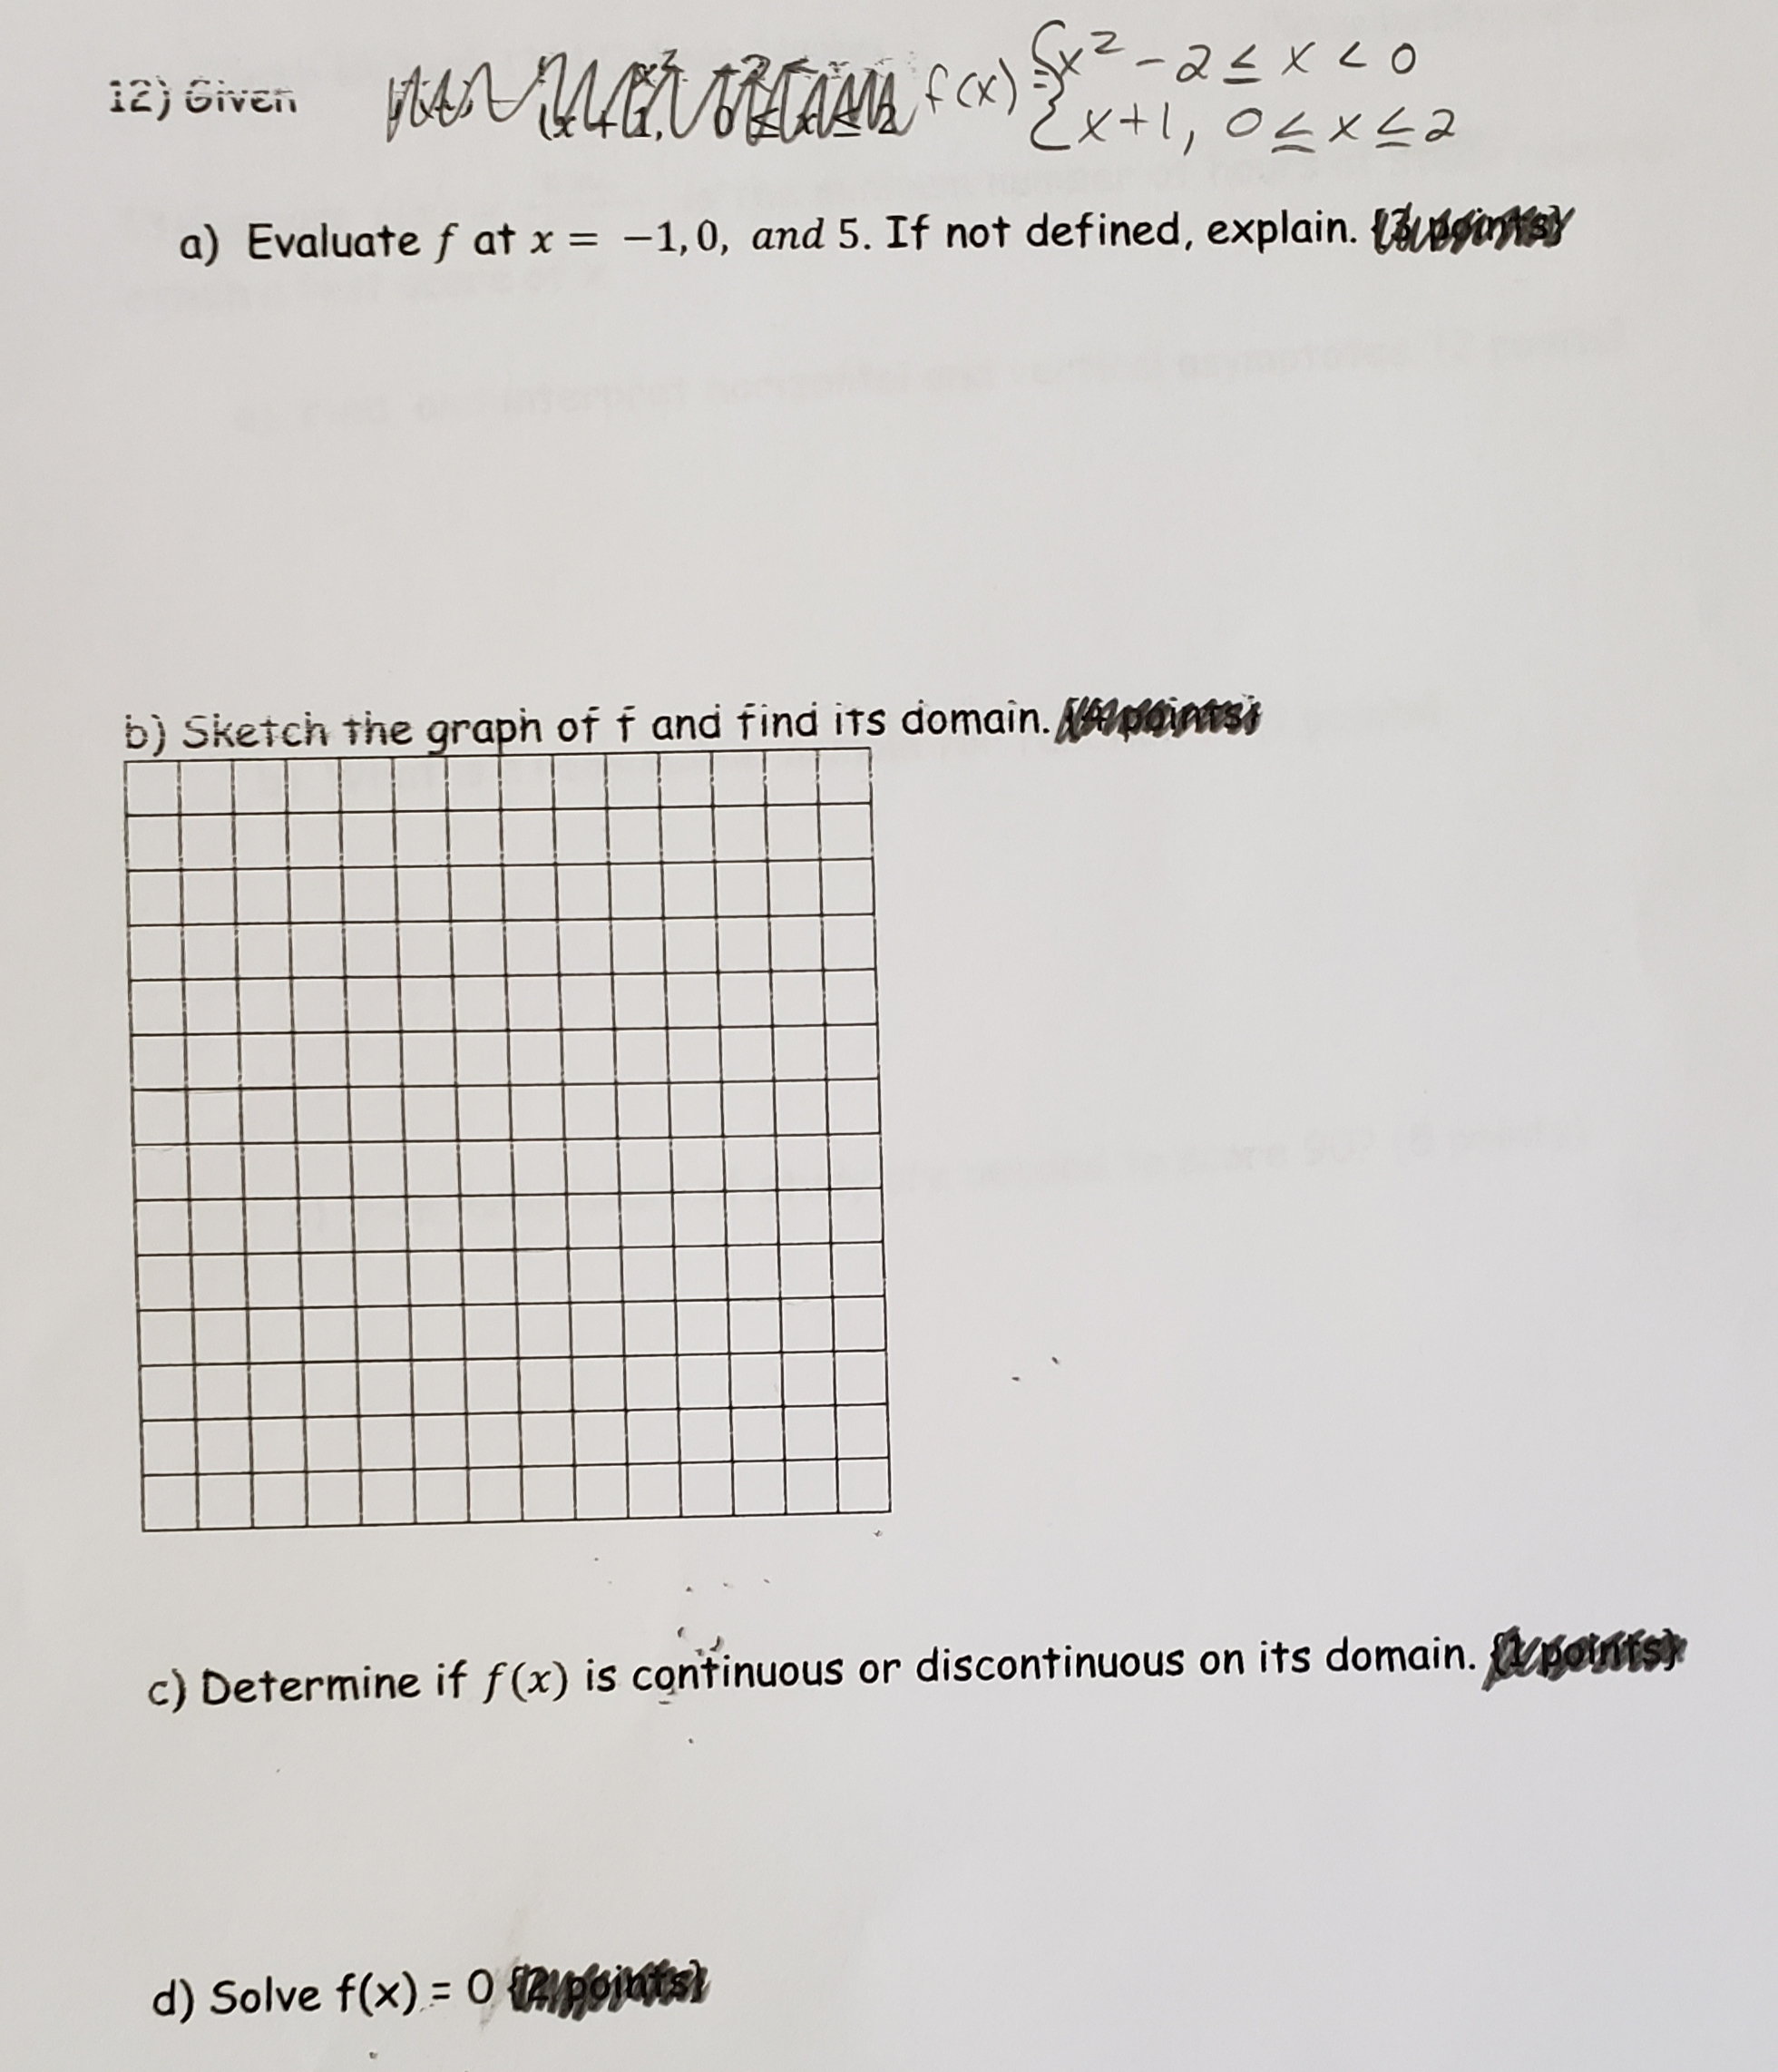 Evaluate f at x = -1,0, and 5. If not defined, explain.
